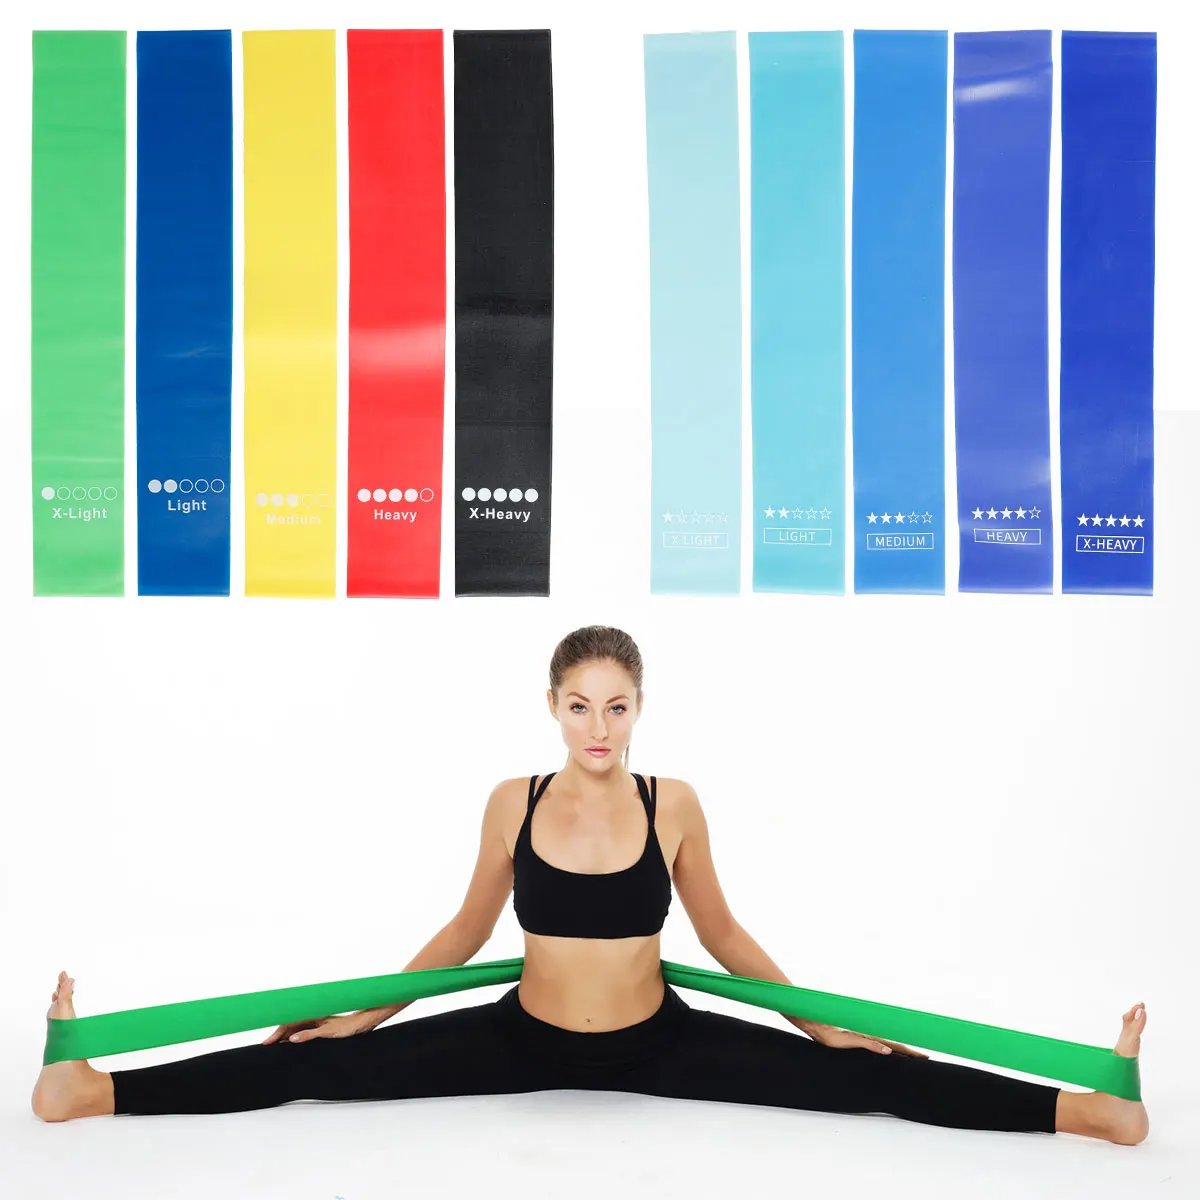 

5pcs Latex Resistance Bands Elastic Fitness Bands Workout Bands 5 Levels Fitness Strength Bands for Arms Butt Legs Gym Equipment